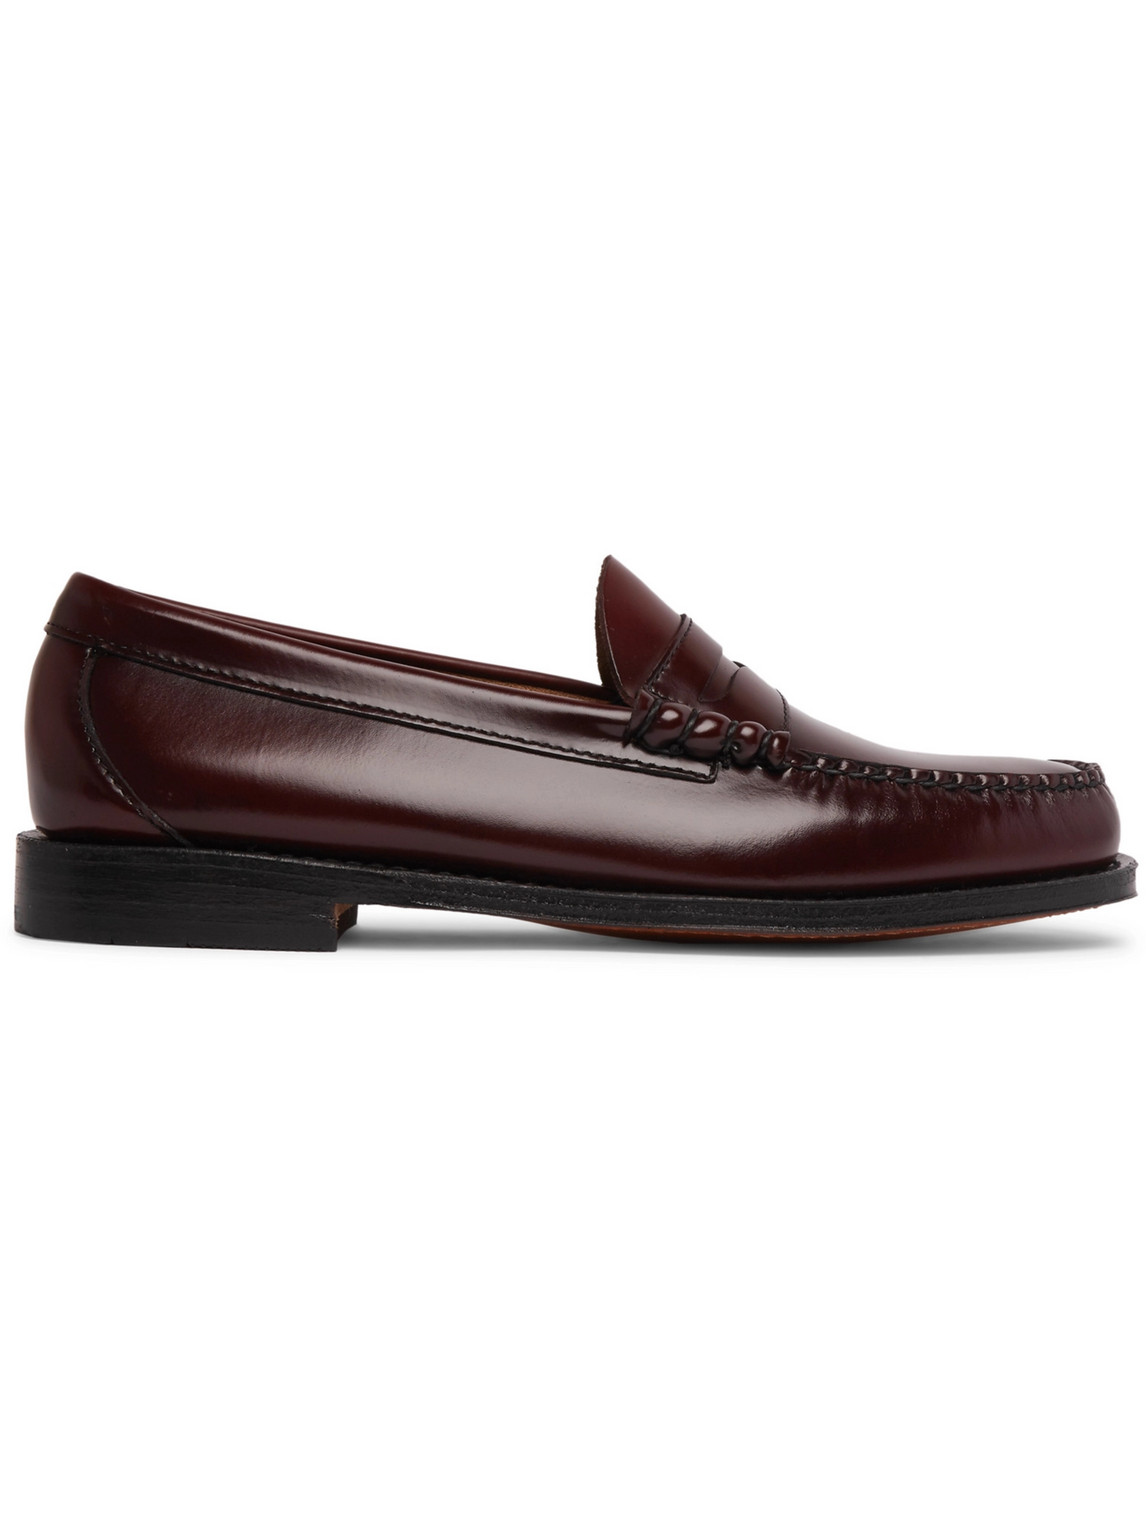 G.H. Bass & Co. - Weejuns Heritage Larson Leather Penny Loafers - Men - Burgundy - UK 8.5 von G.H. Bass & Co.